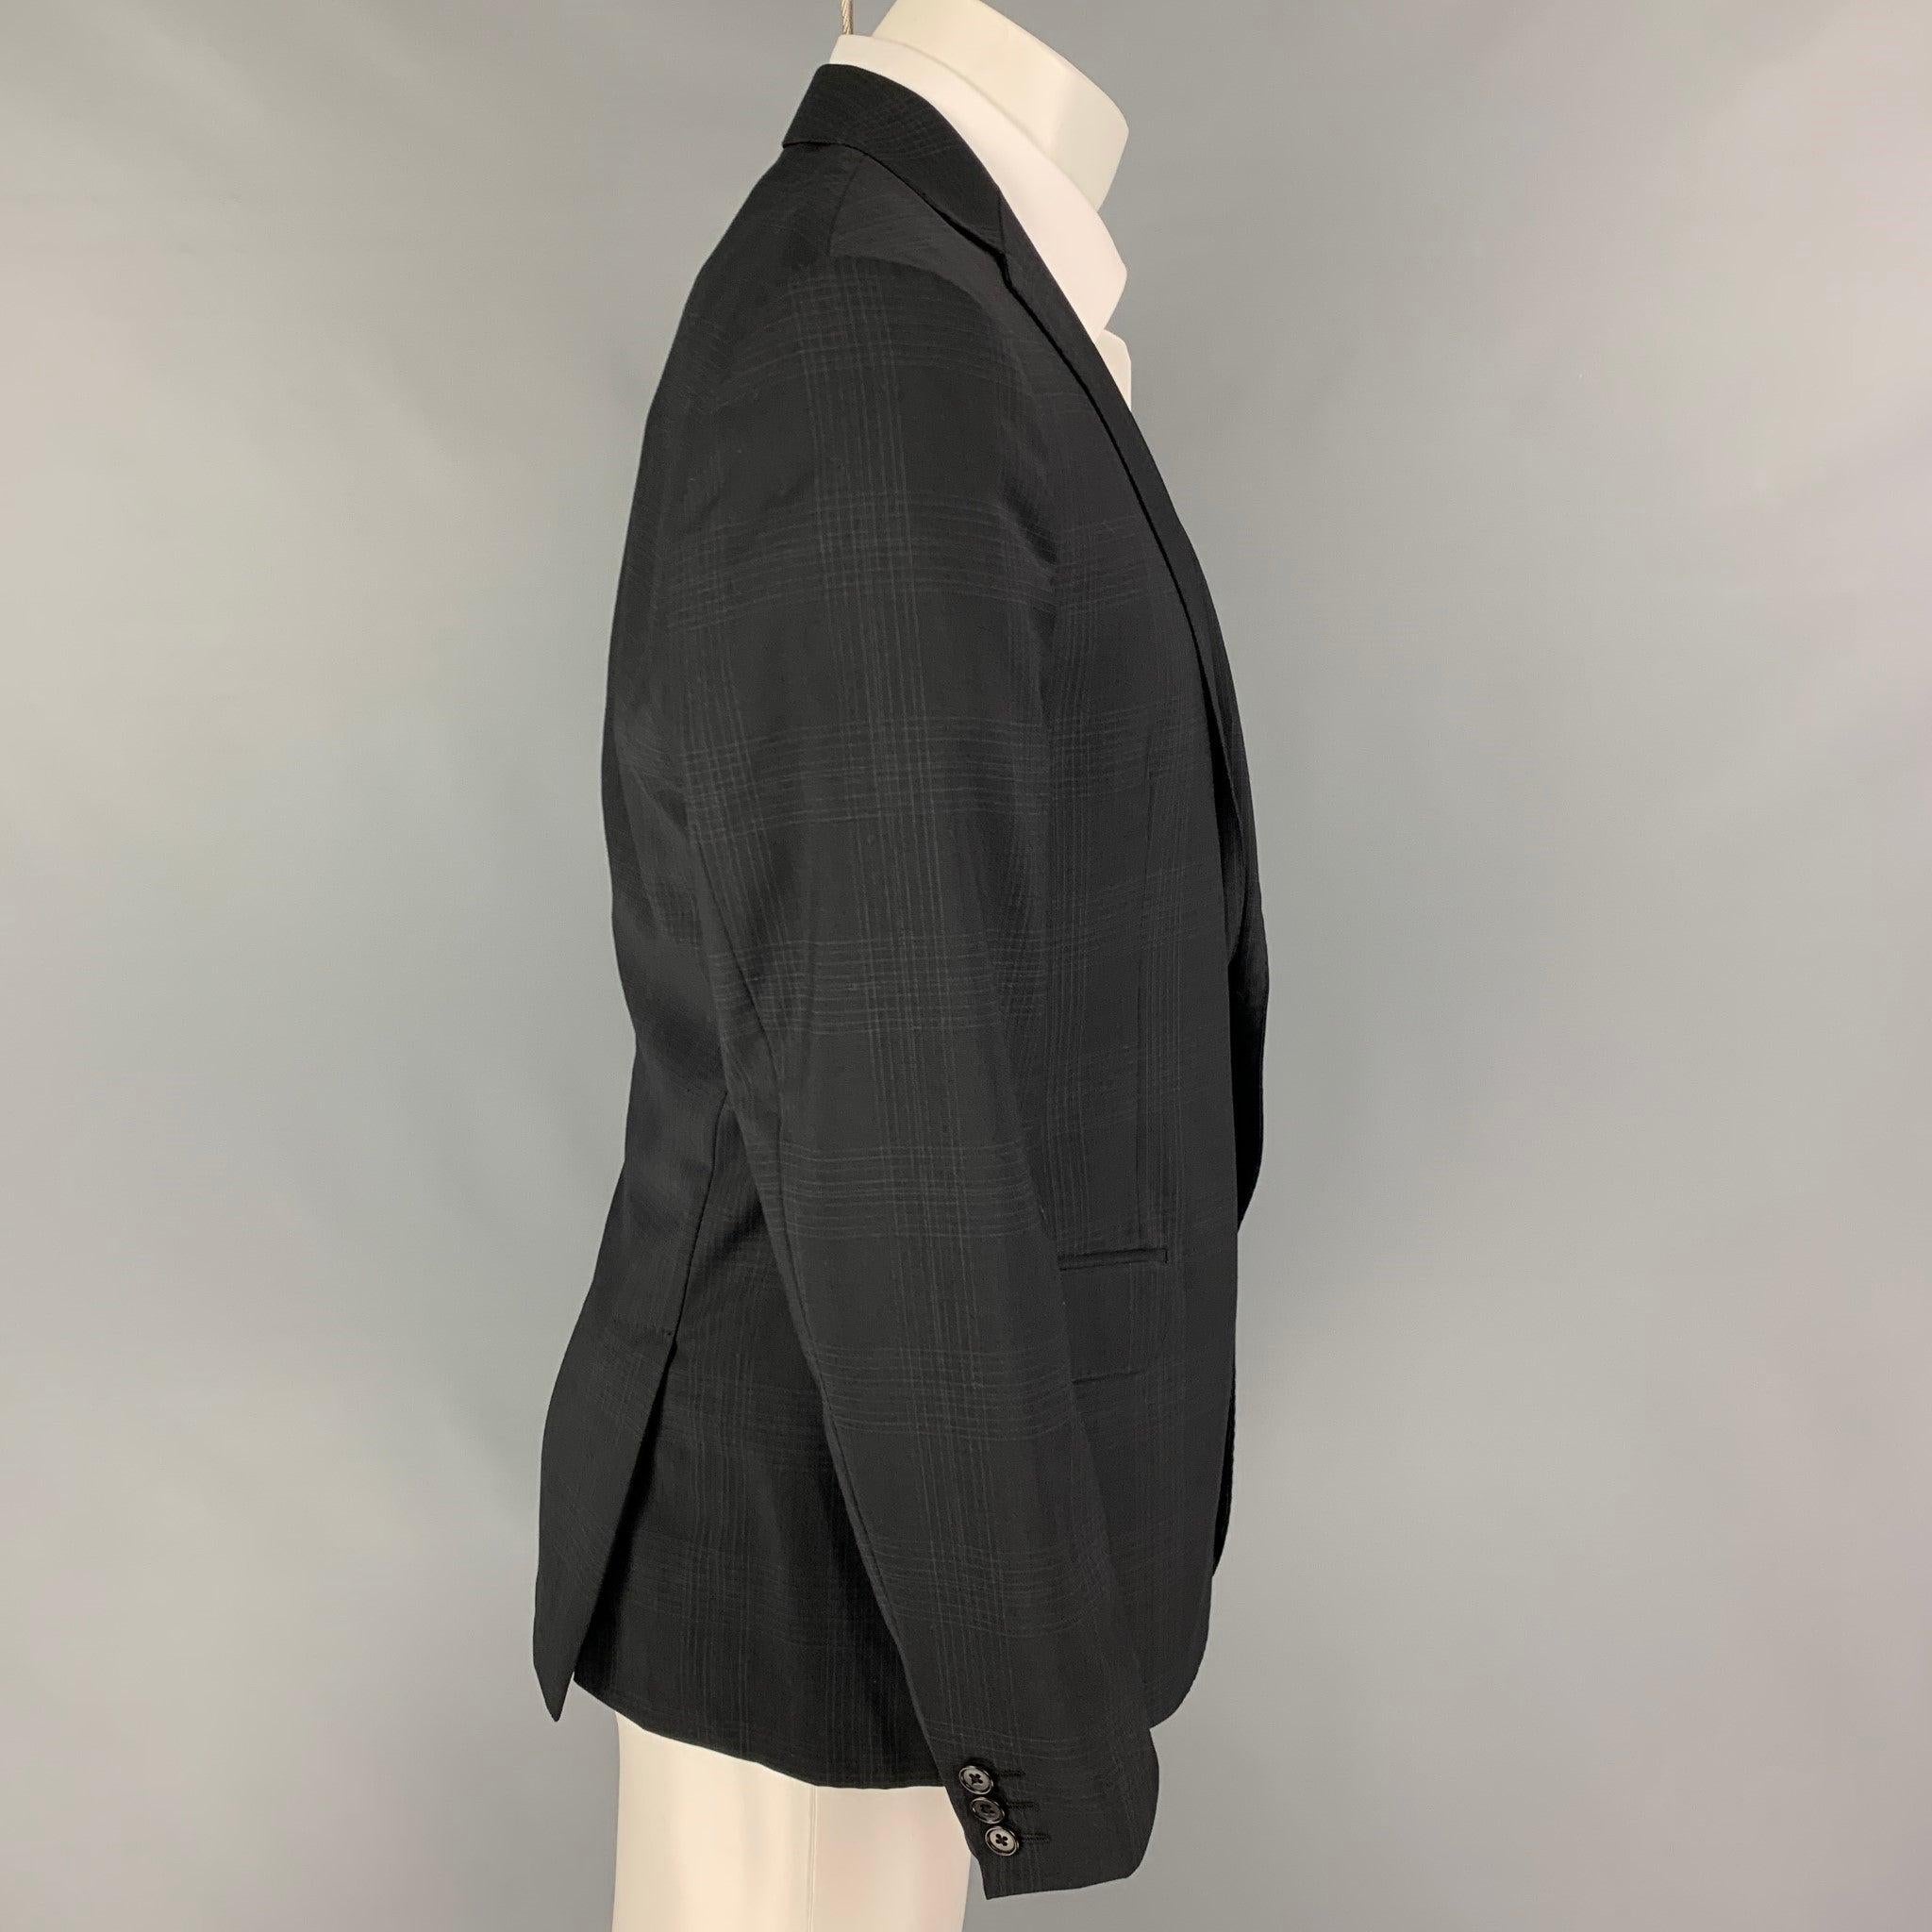 JOHN VARVATOS sport coat comes in a black plaid wool with a full liner featuring a notch lapel, flap pockets, double back vent, and a double button closure. Made in Italy.
Very Good
Pre-Owned Condition. 

Marked:   50 

Measurements: 
 
Shoulder: